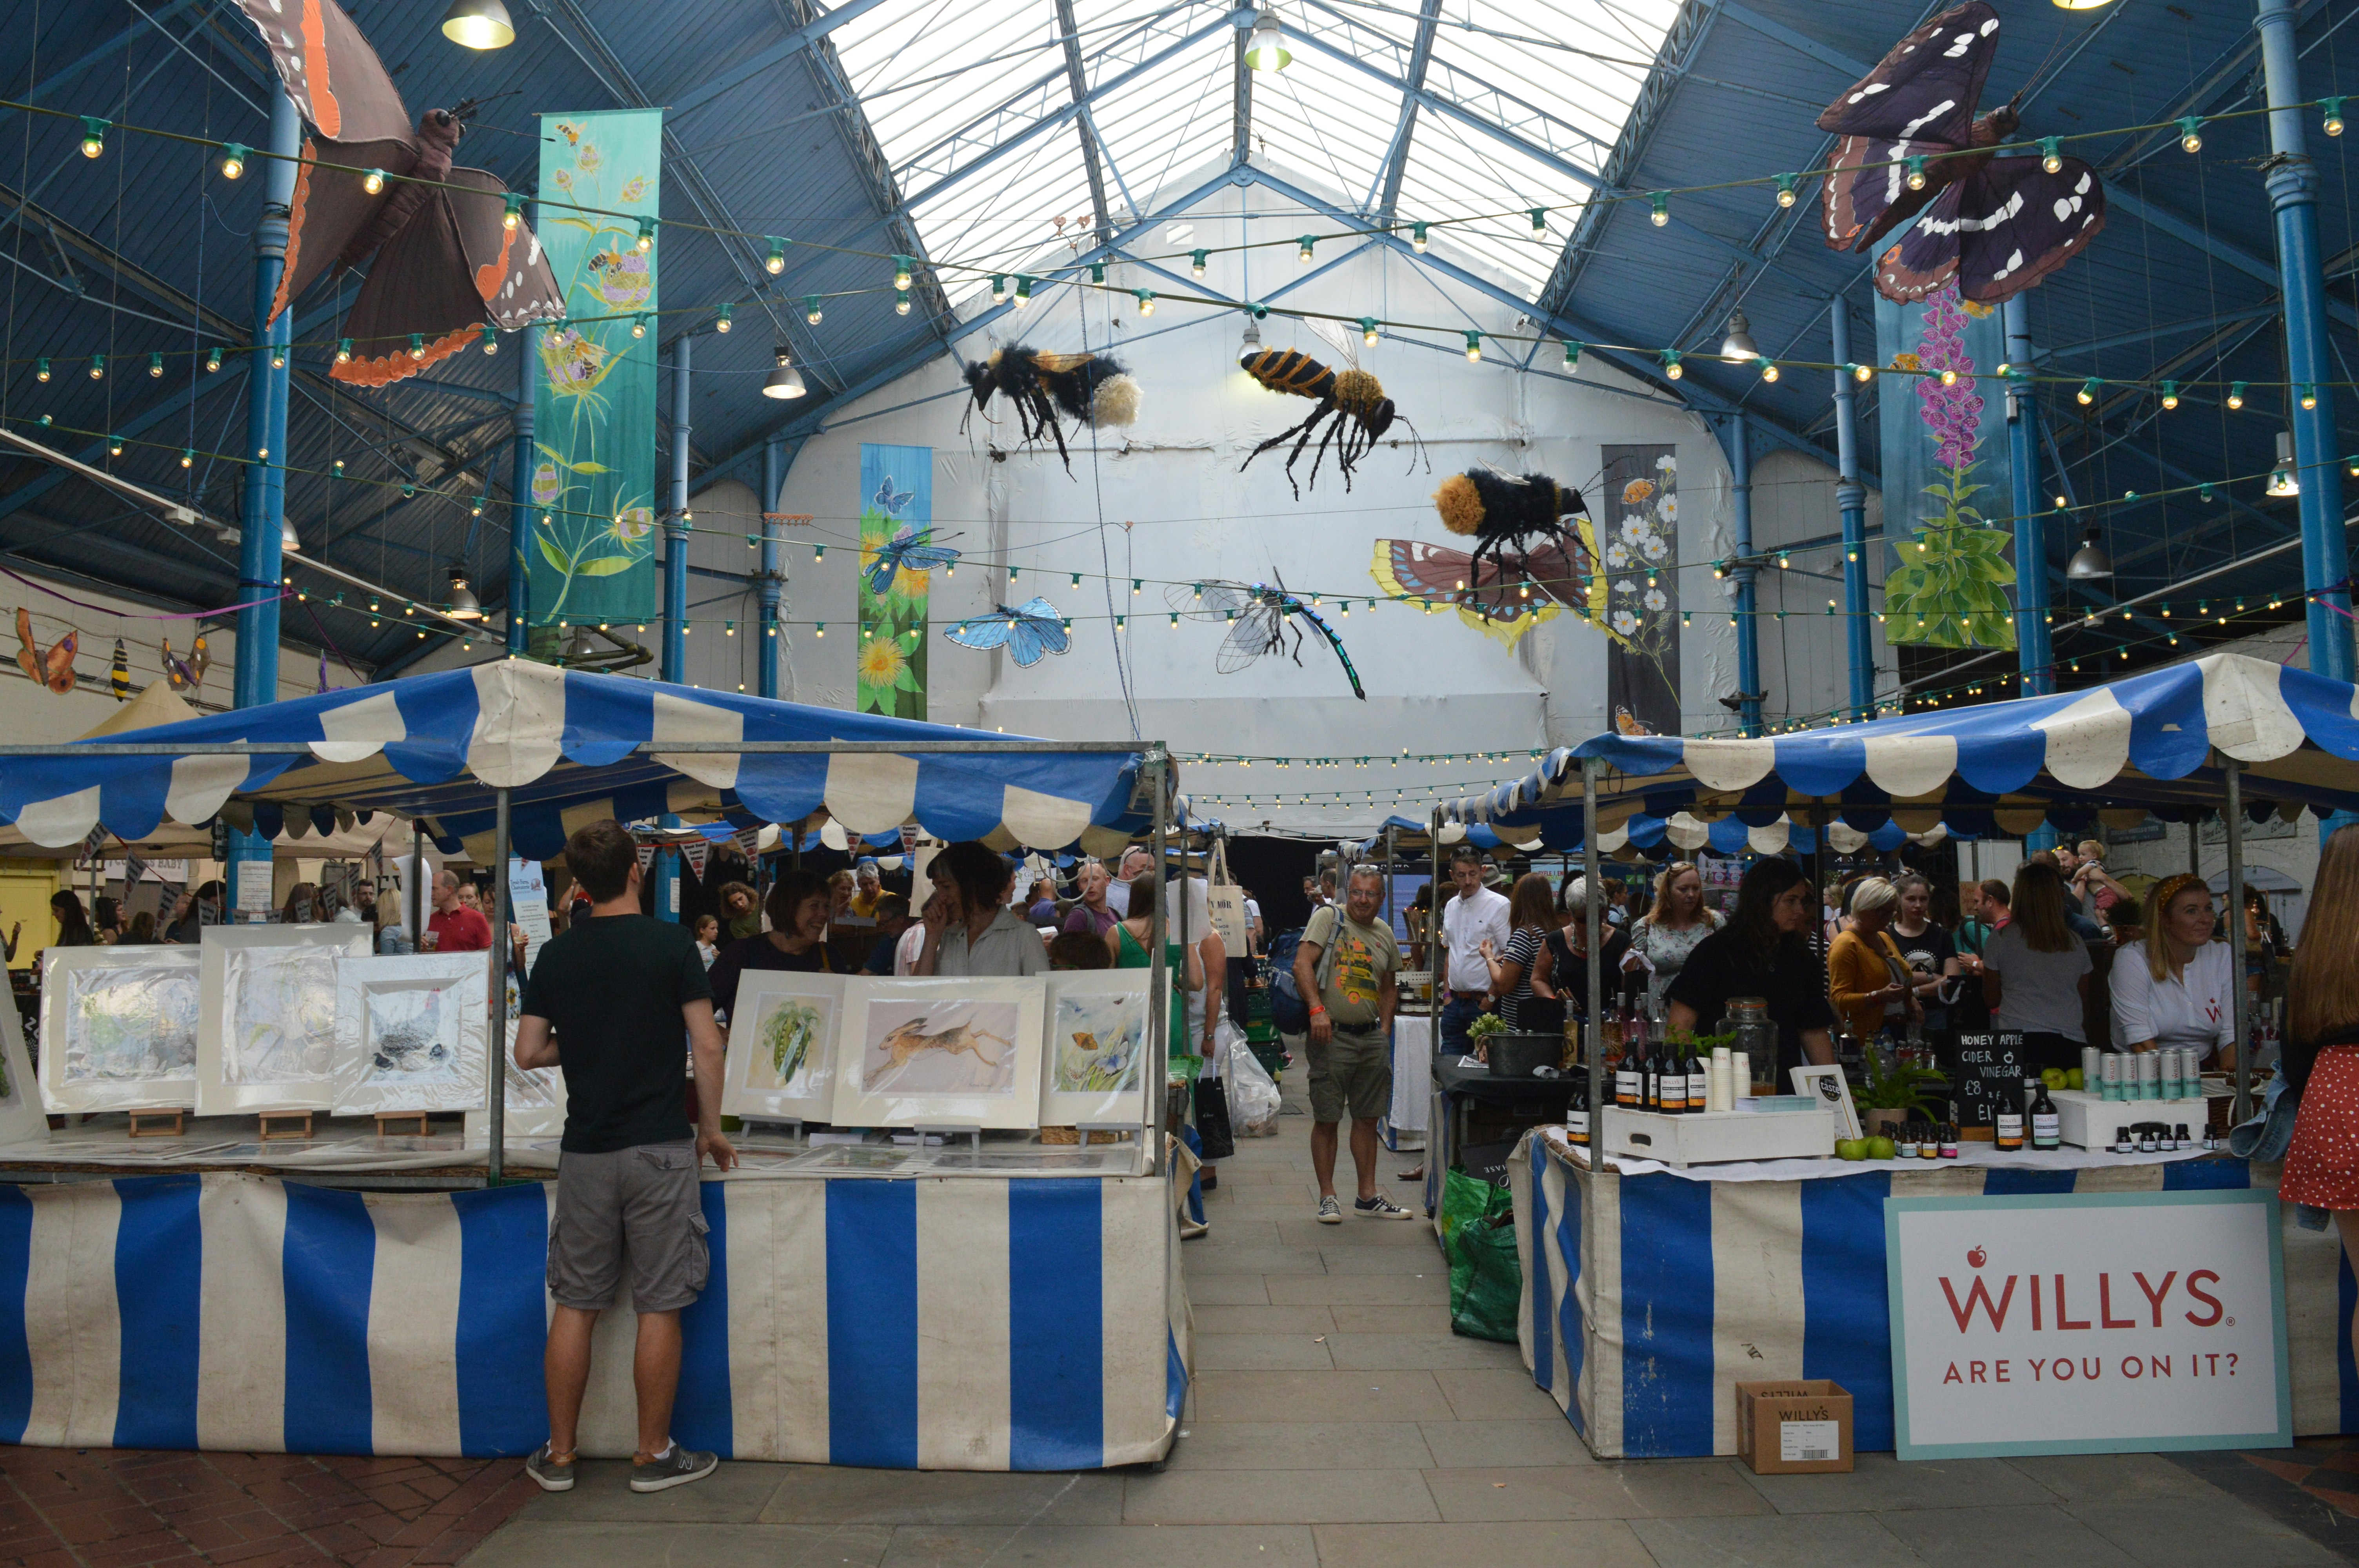 The interior of the market hall in Abergavenny filled with food stalls